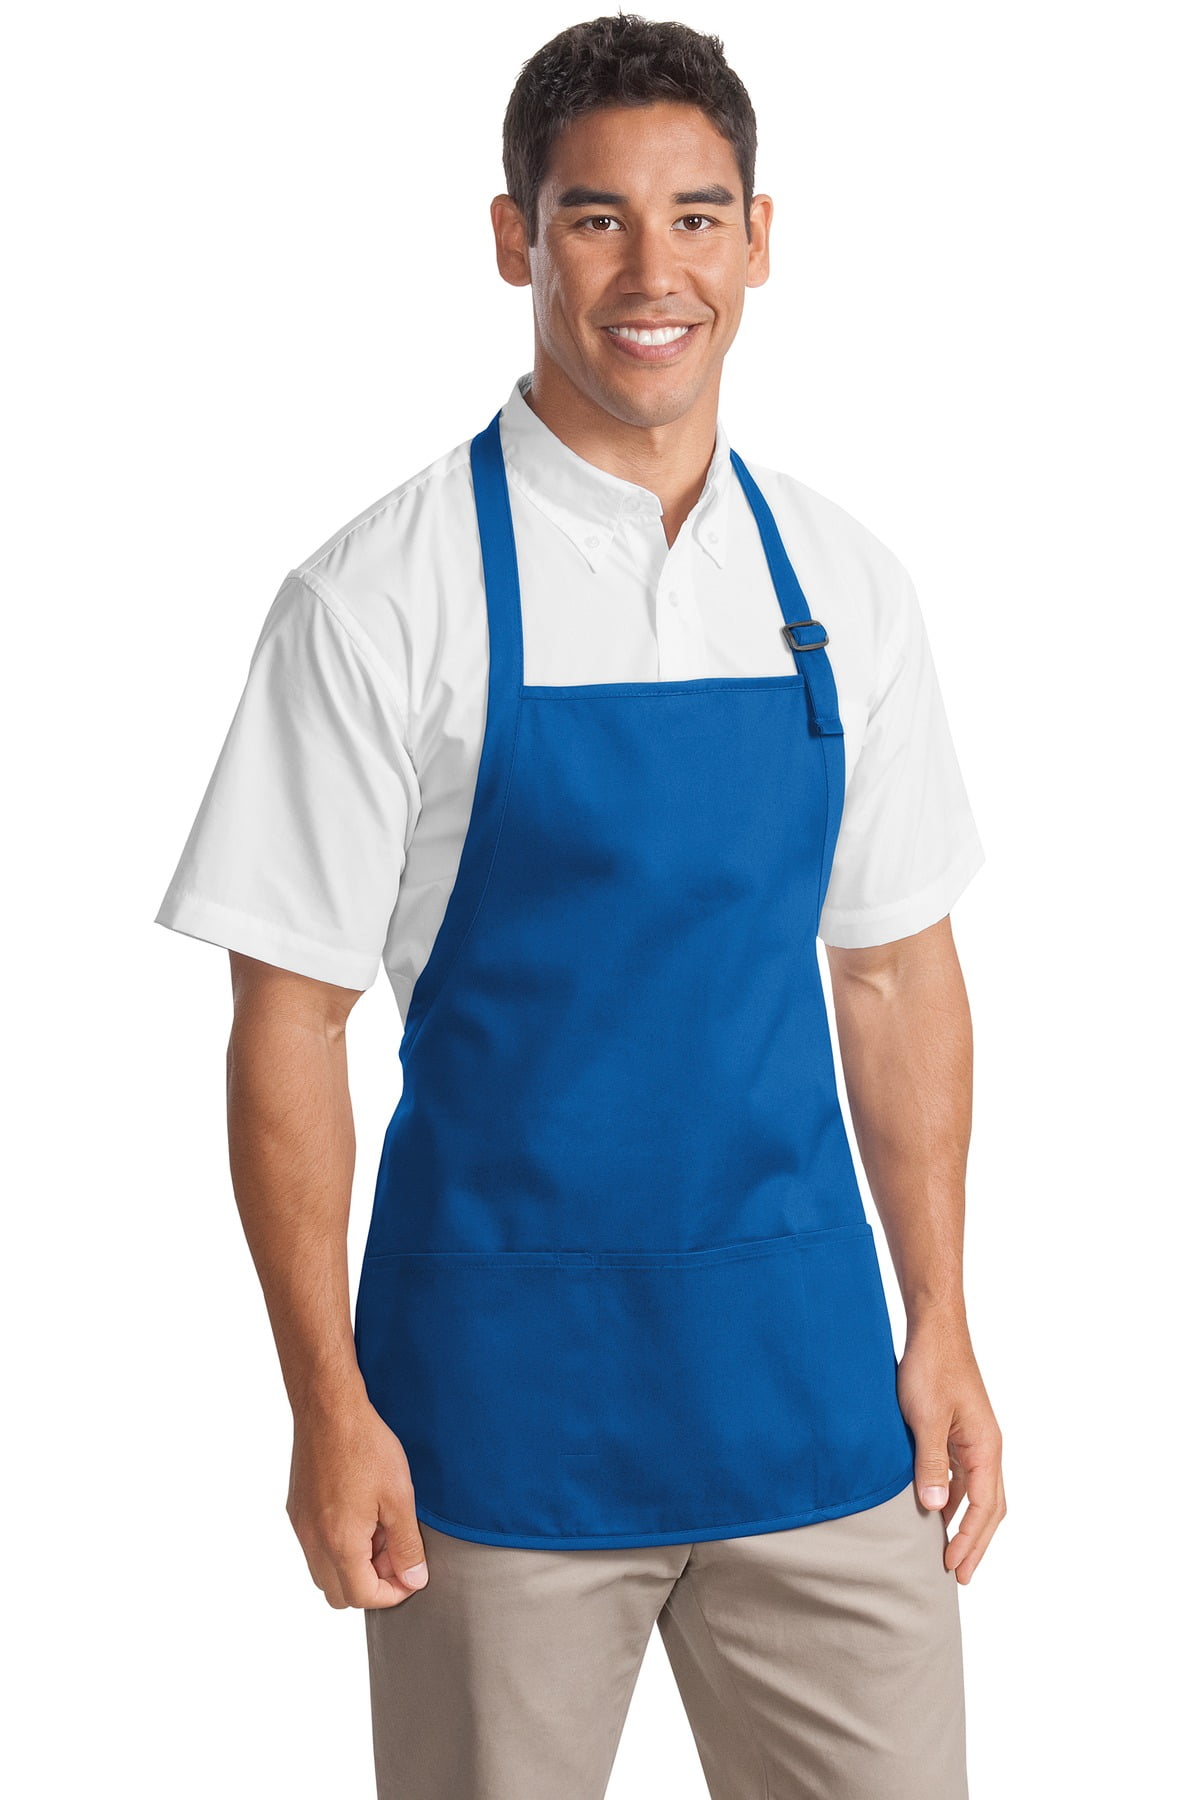 ROYAL BLUE  TABARD  APRON WITH FRONT POCKETS KITCHEN CLEANING CHEF  medium 